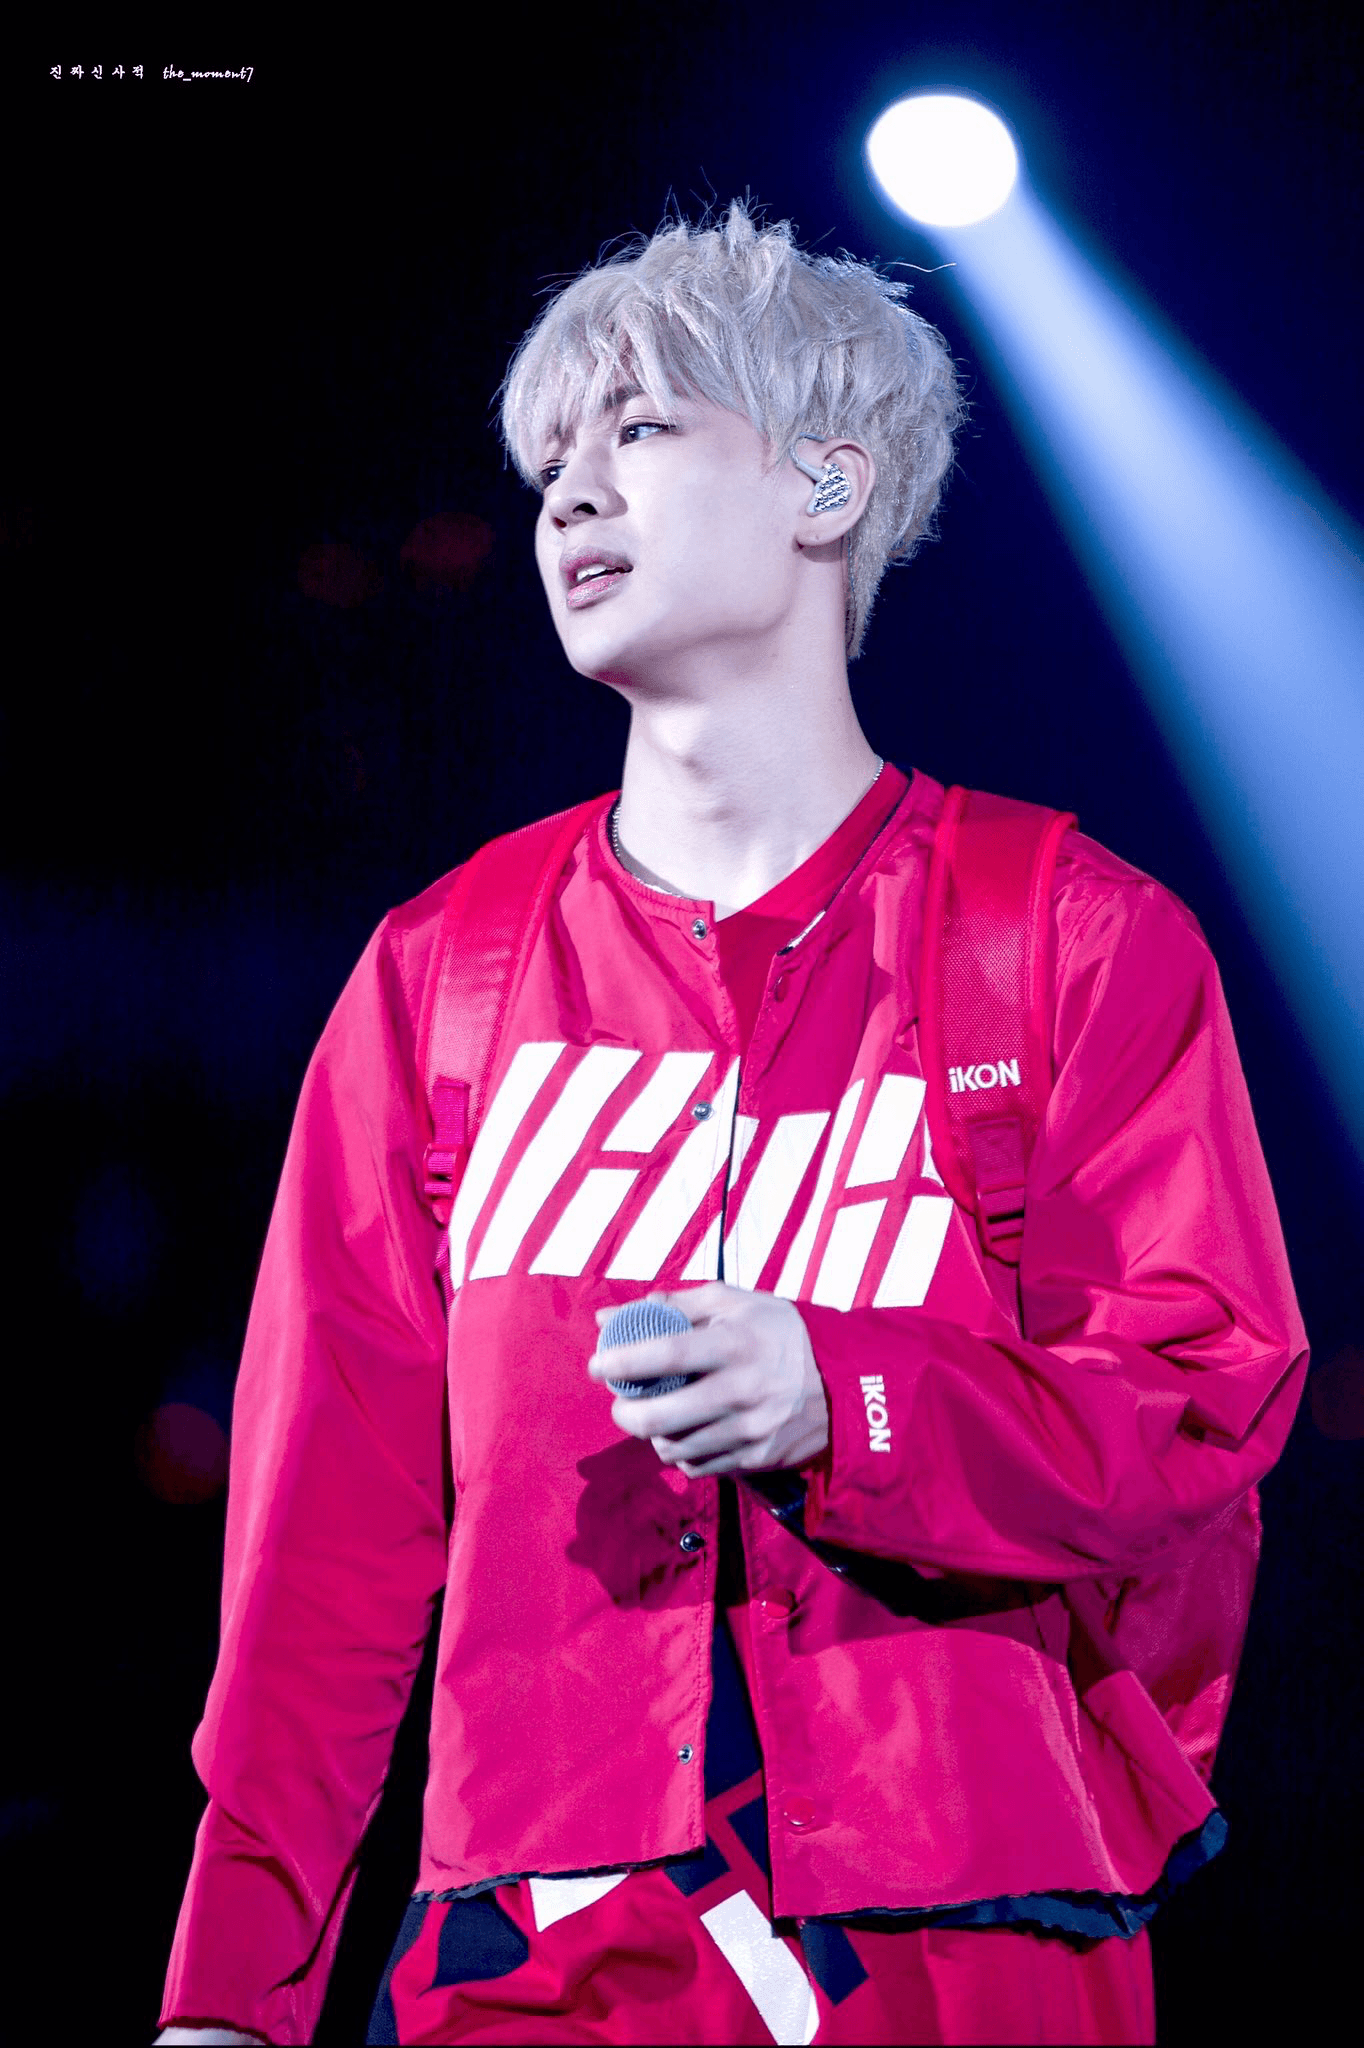 List of Synonyms and Antonyms of the Word: ikon yunhyeong